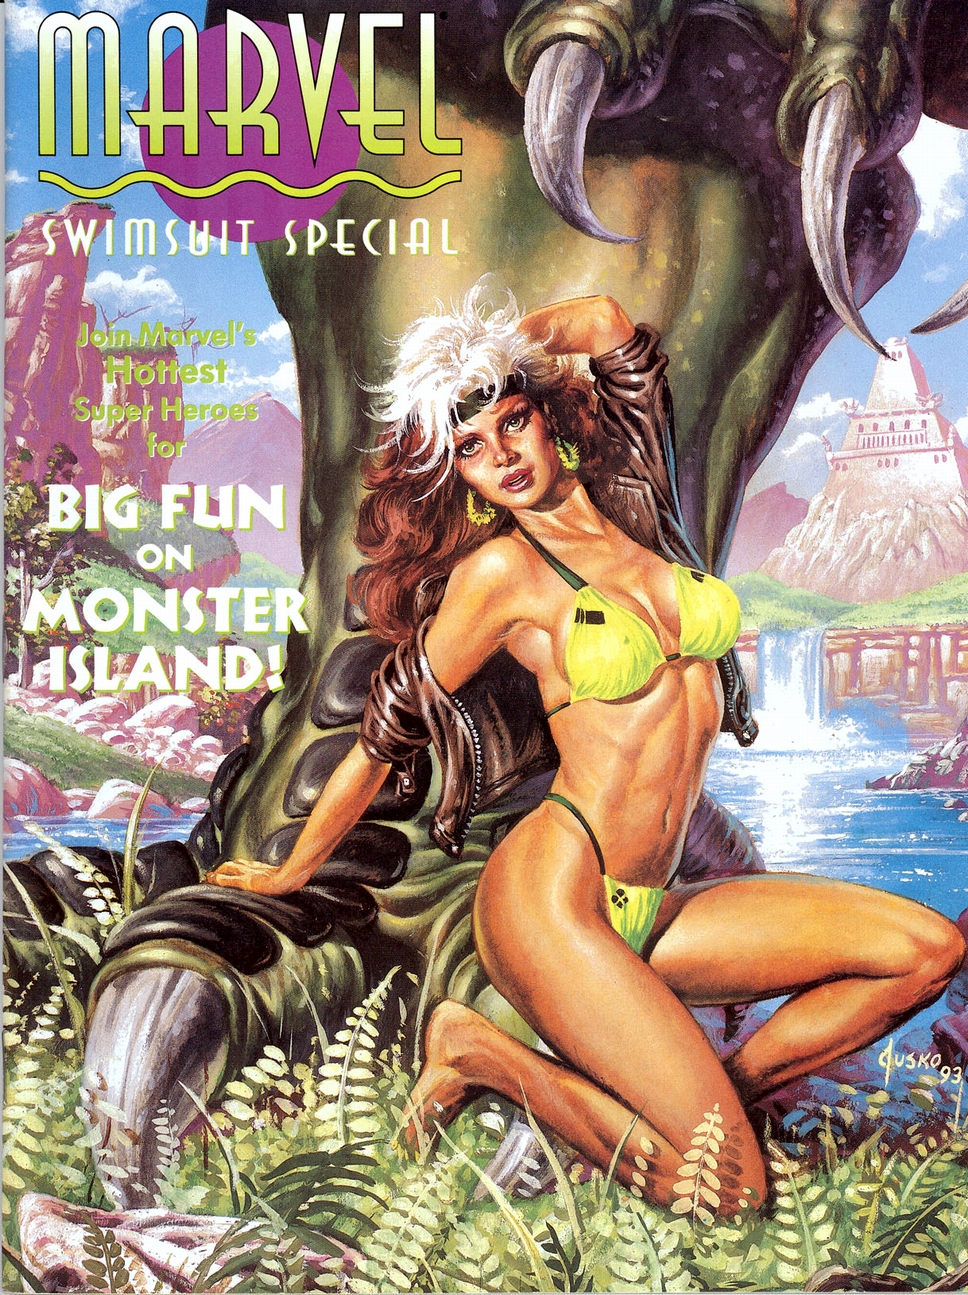 Marvel Swimsuit Special #18